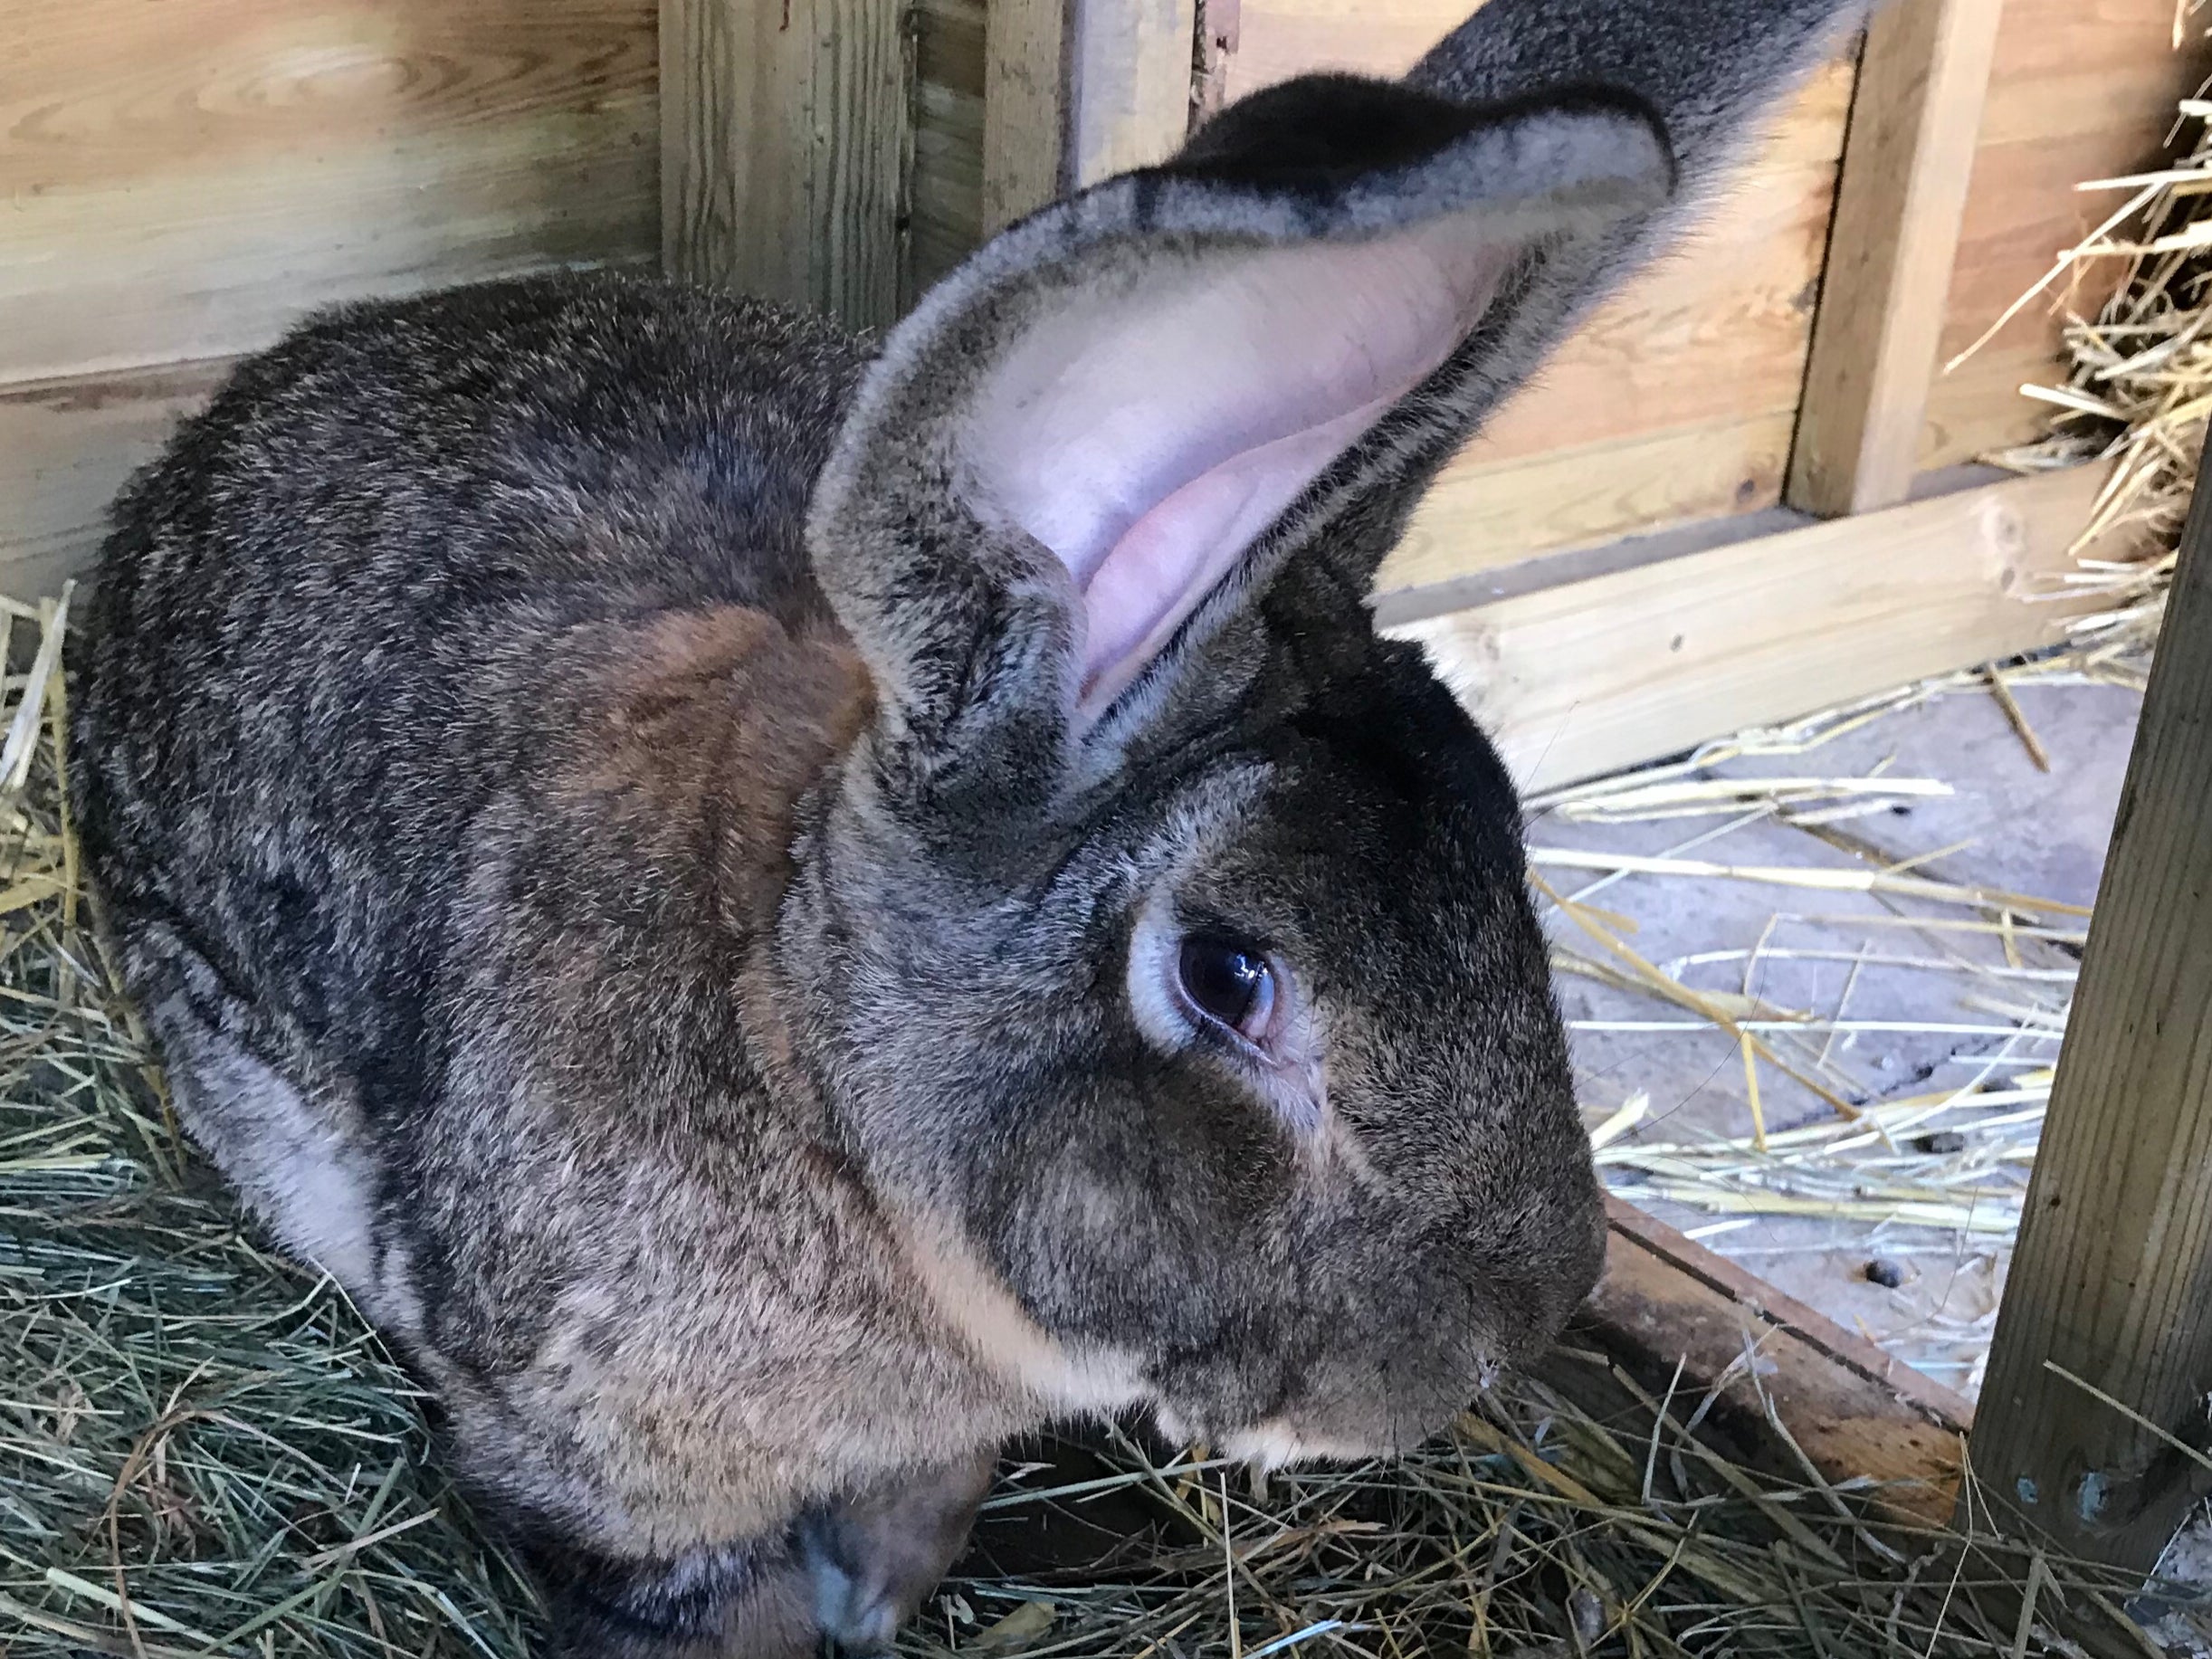 Darius, a continental giant rabbit, which holds the Guinness world record for being the biggest of its kind, is feared to have been stolen after disappearing from its enclosure in Stoulton, Worcestershire